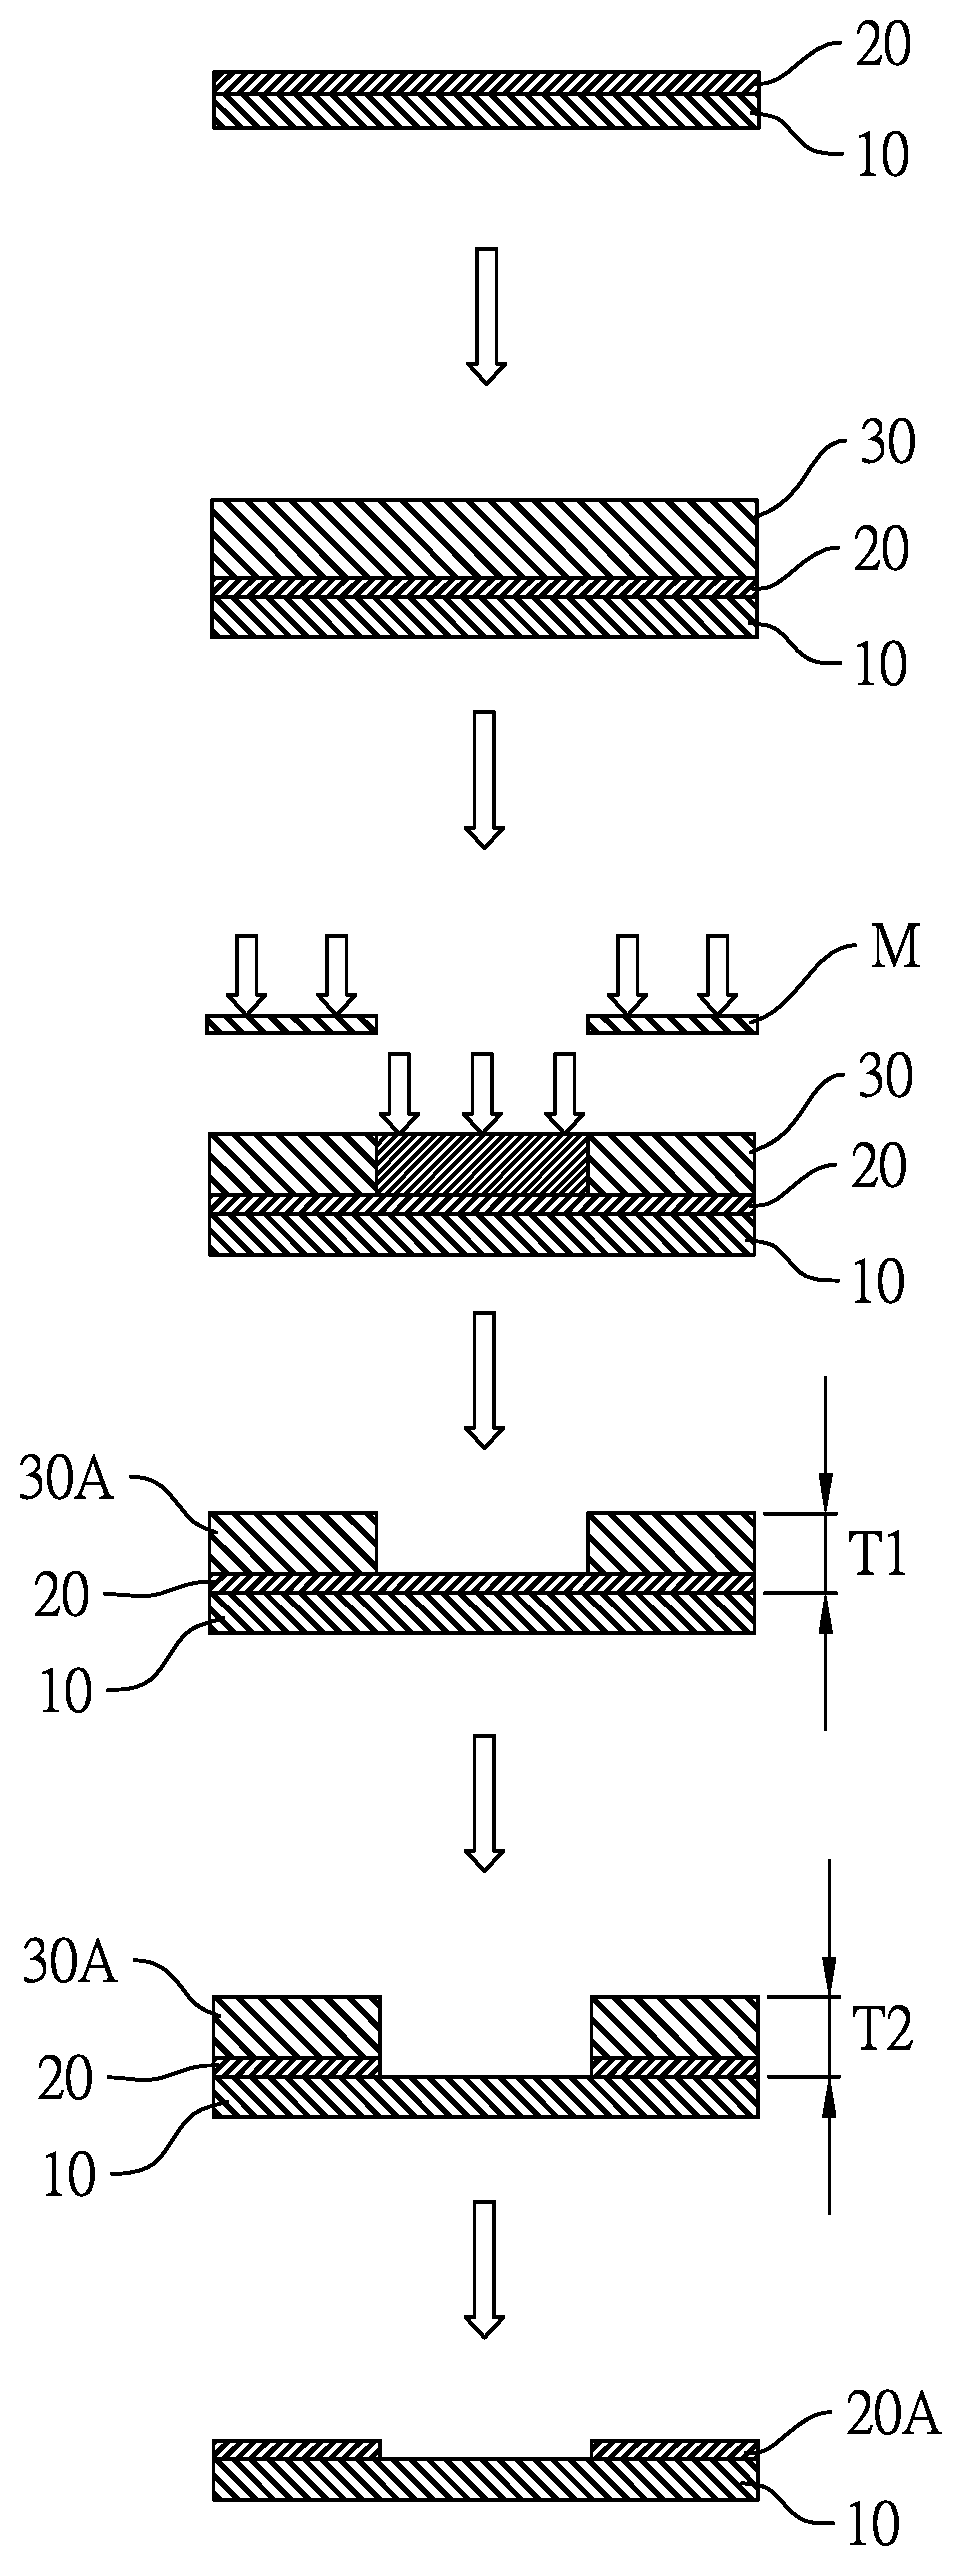 Method of forming patterned polyimide layer